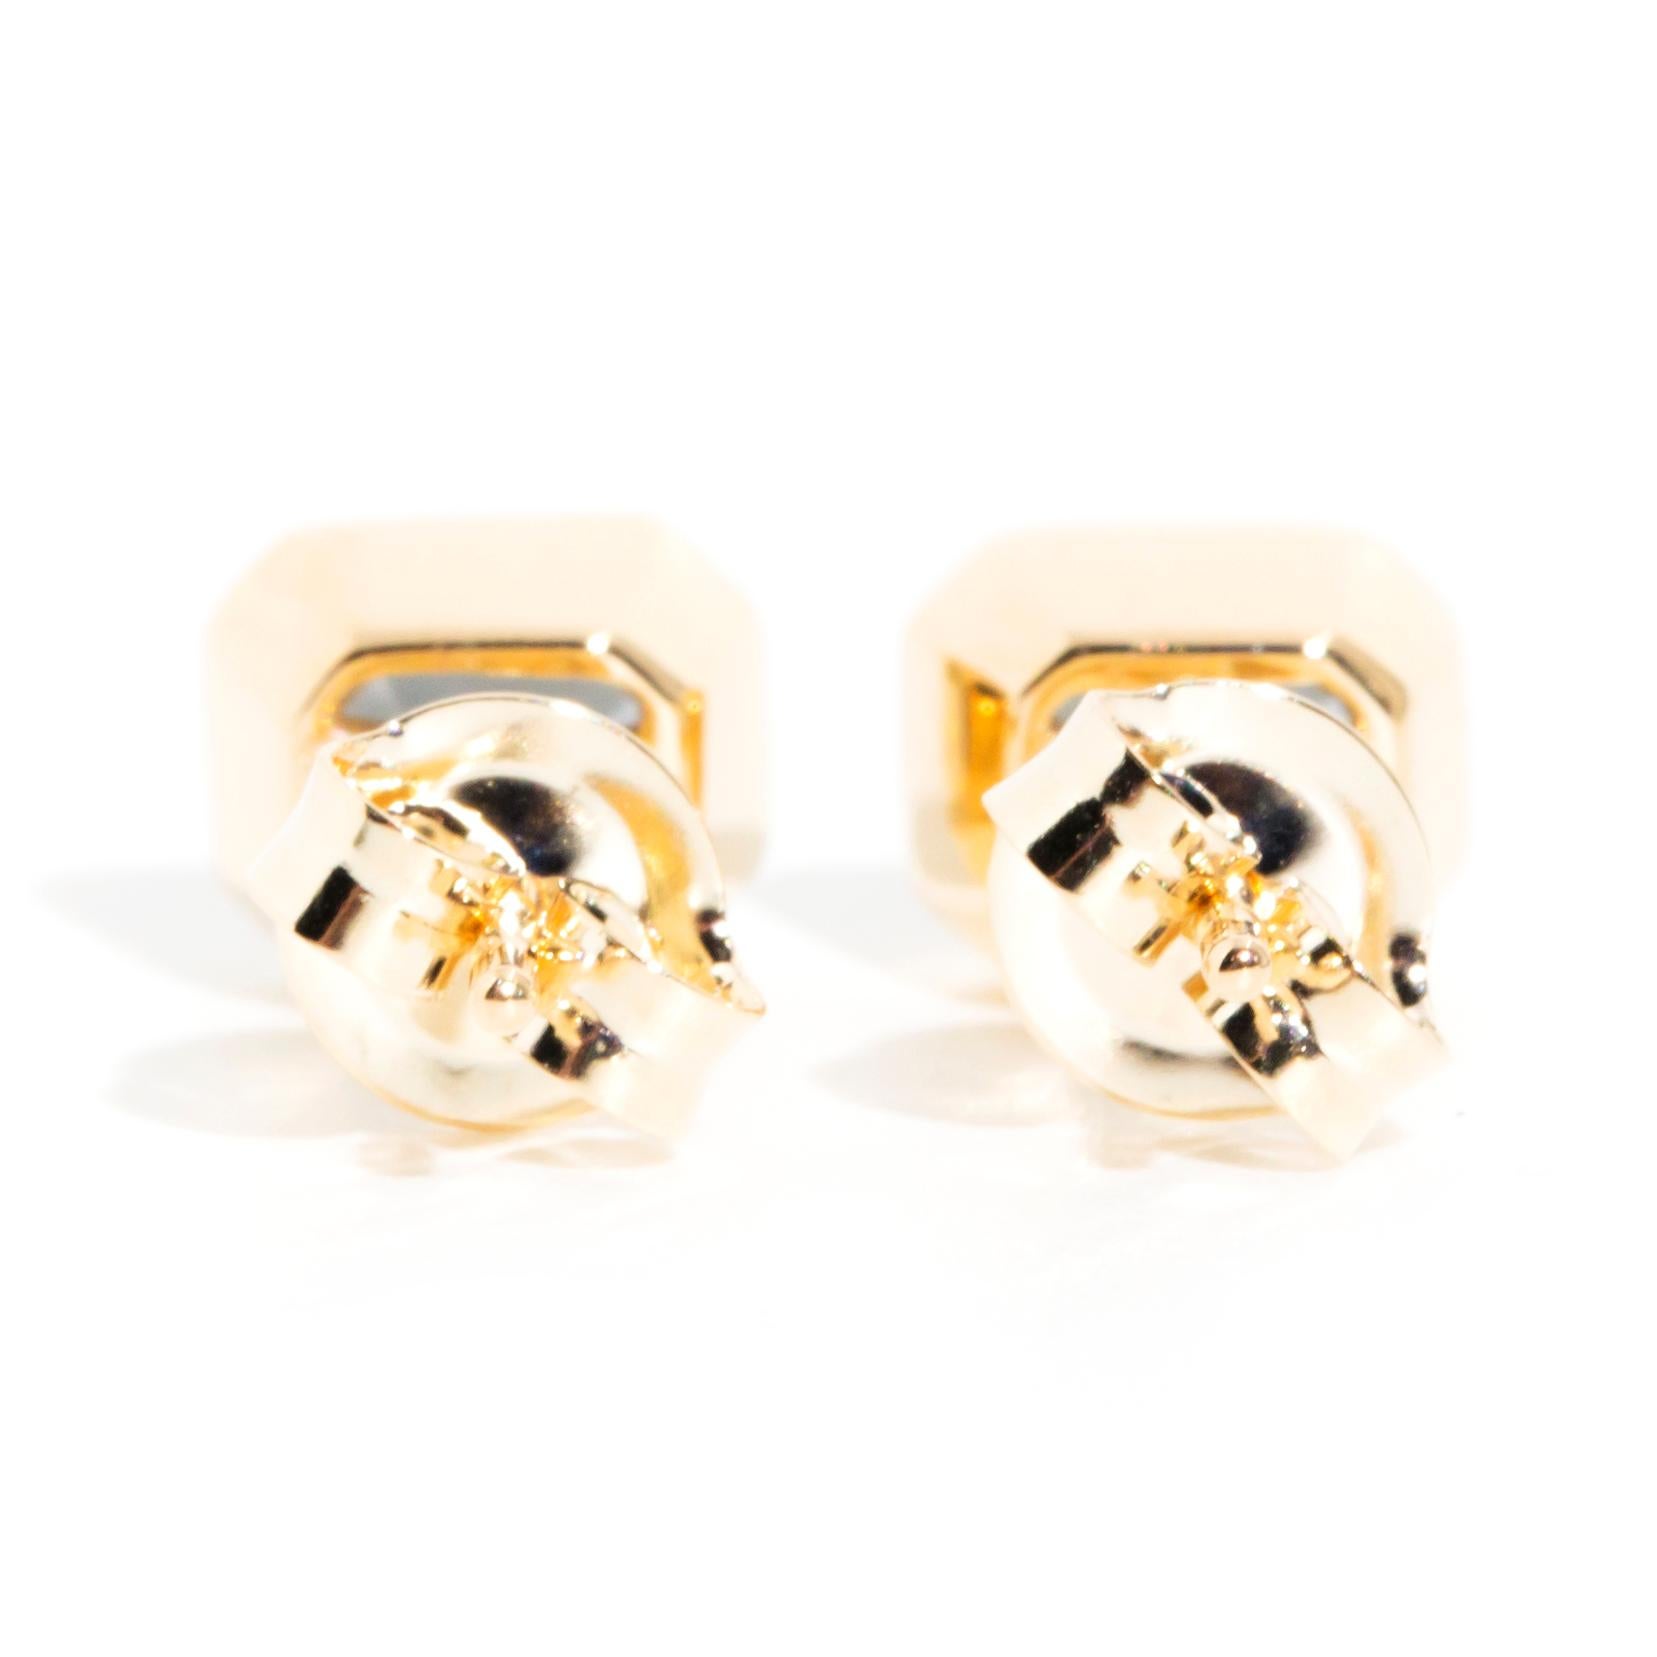 Blue Grey Spinel Contemporary Stud Style Earrings in 9 Carat Yellow Gold 3